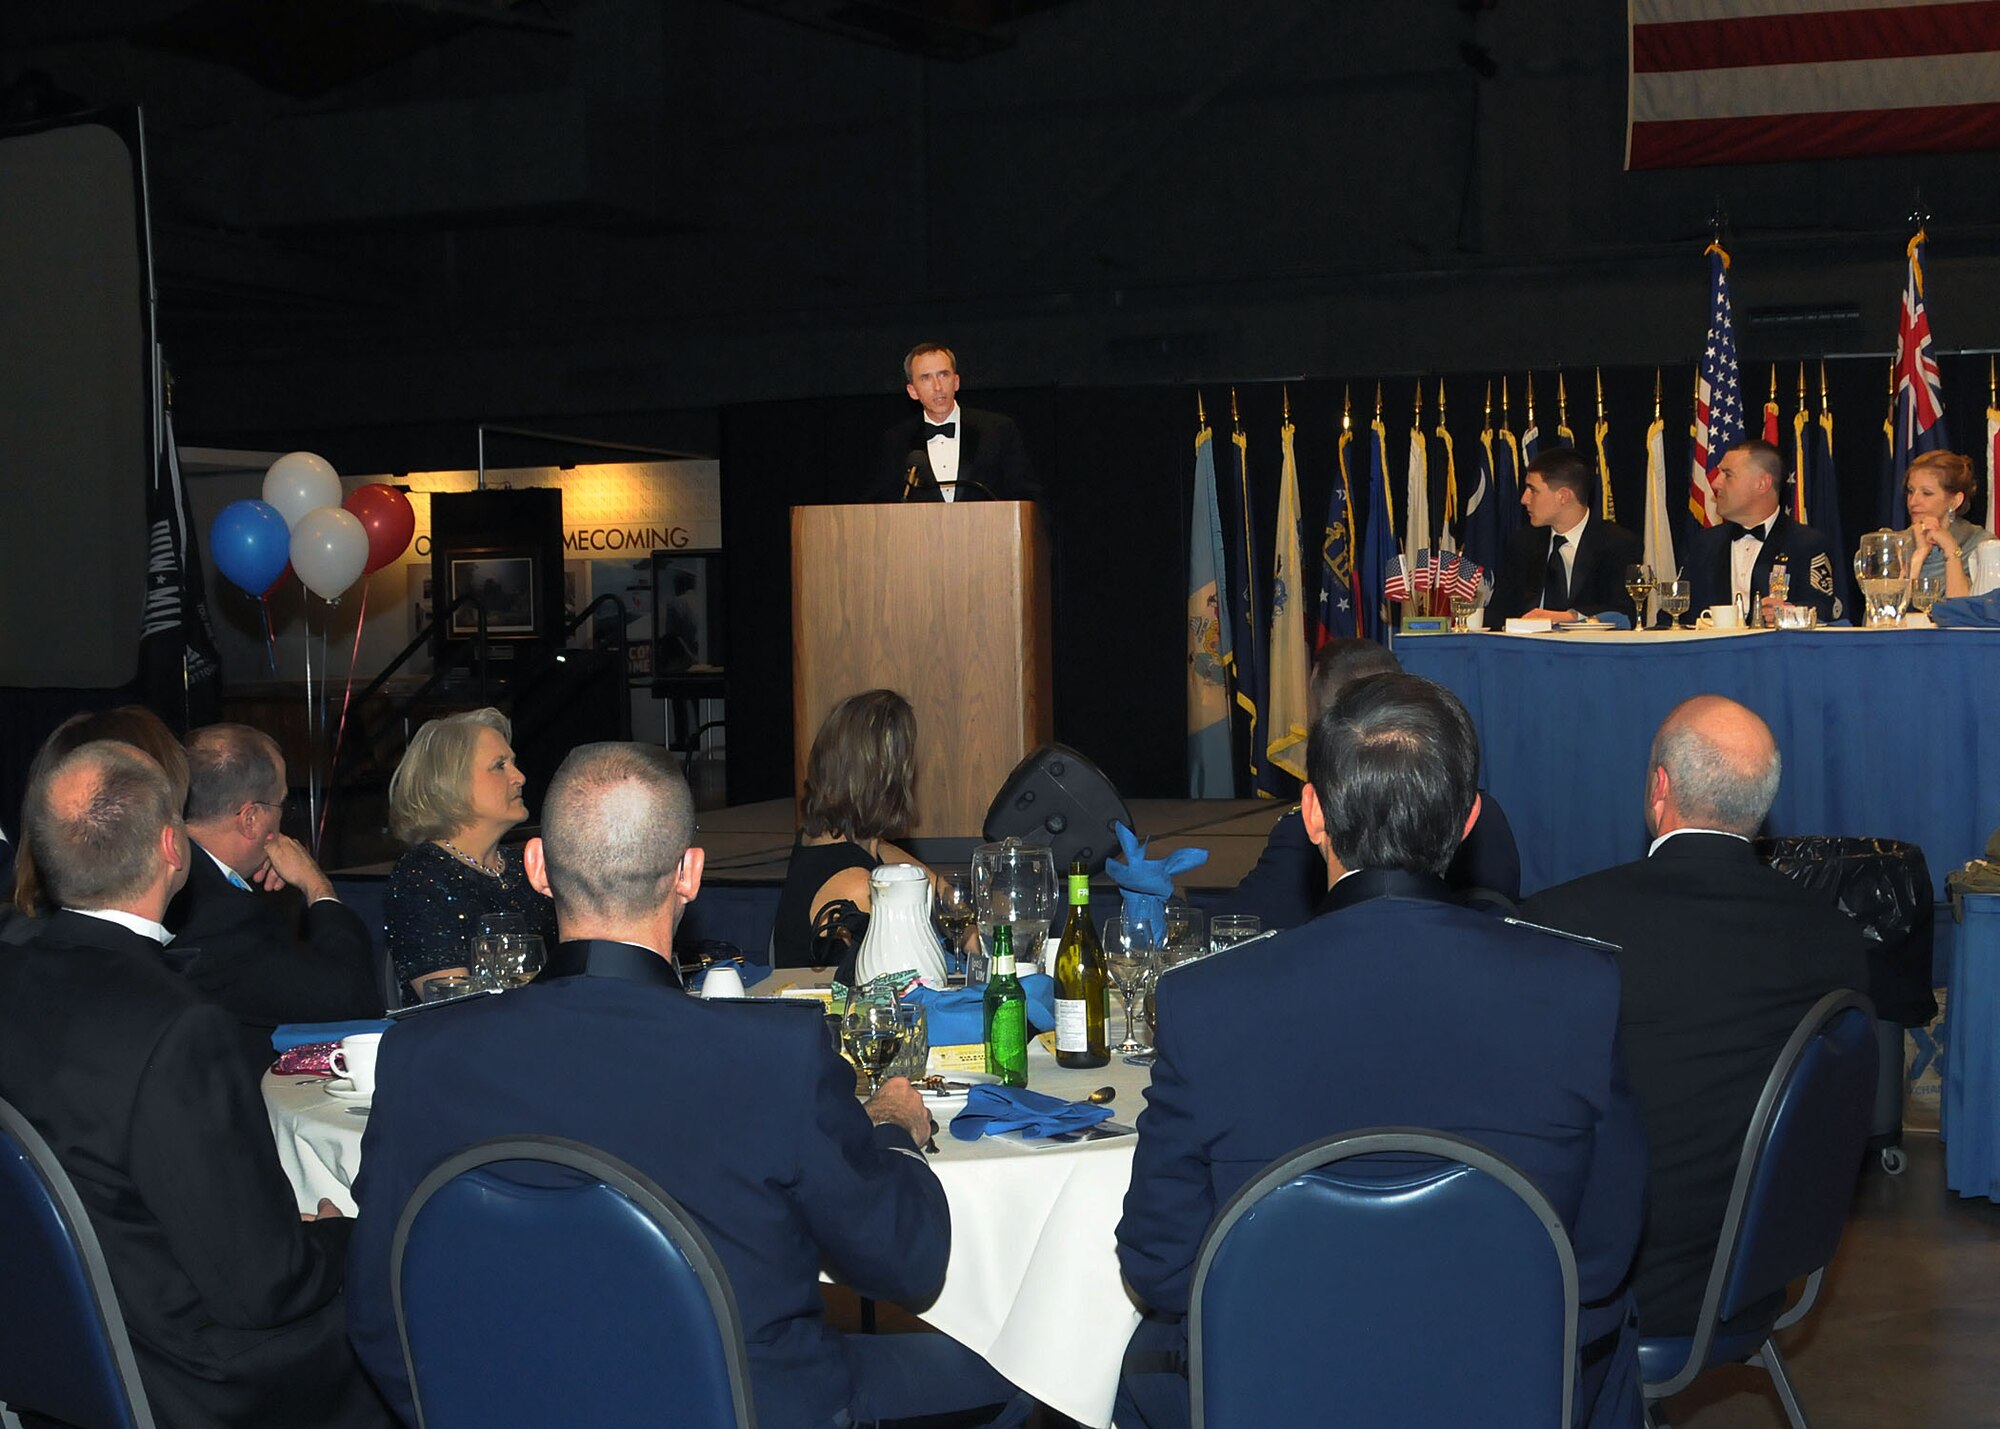 WRIGHT-PATTERSON AIR FORCE BASE, Ohio – Marcel Lettre, principal deputy undersecretary of defense for intelligence, speaks to employees of the National Air and Space Intelligence Center, during the center's annual dining out ceremony Friday, March 27, 2015. Lettre was the guest speaker for this year’s event and spoke about how grateful he was for NASIC’s support to decision-makers in Washington. (U.S. Air Force photo by Staff Sgt. Marianne E. Lane/)